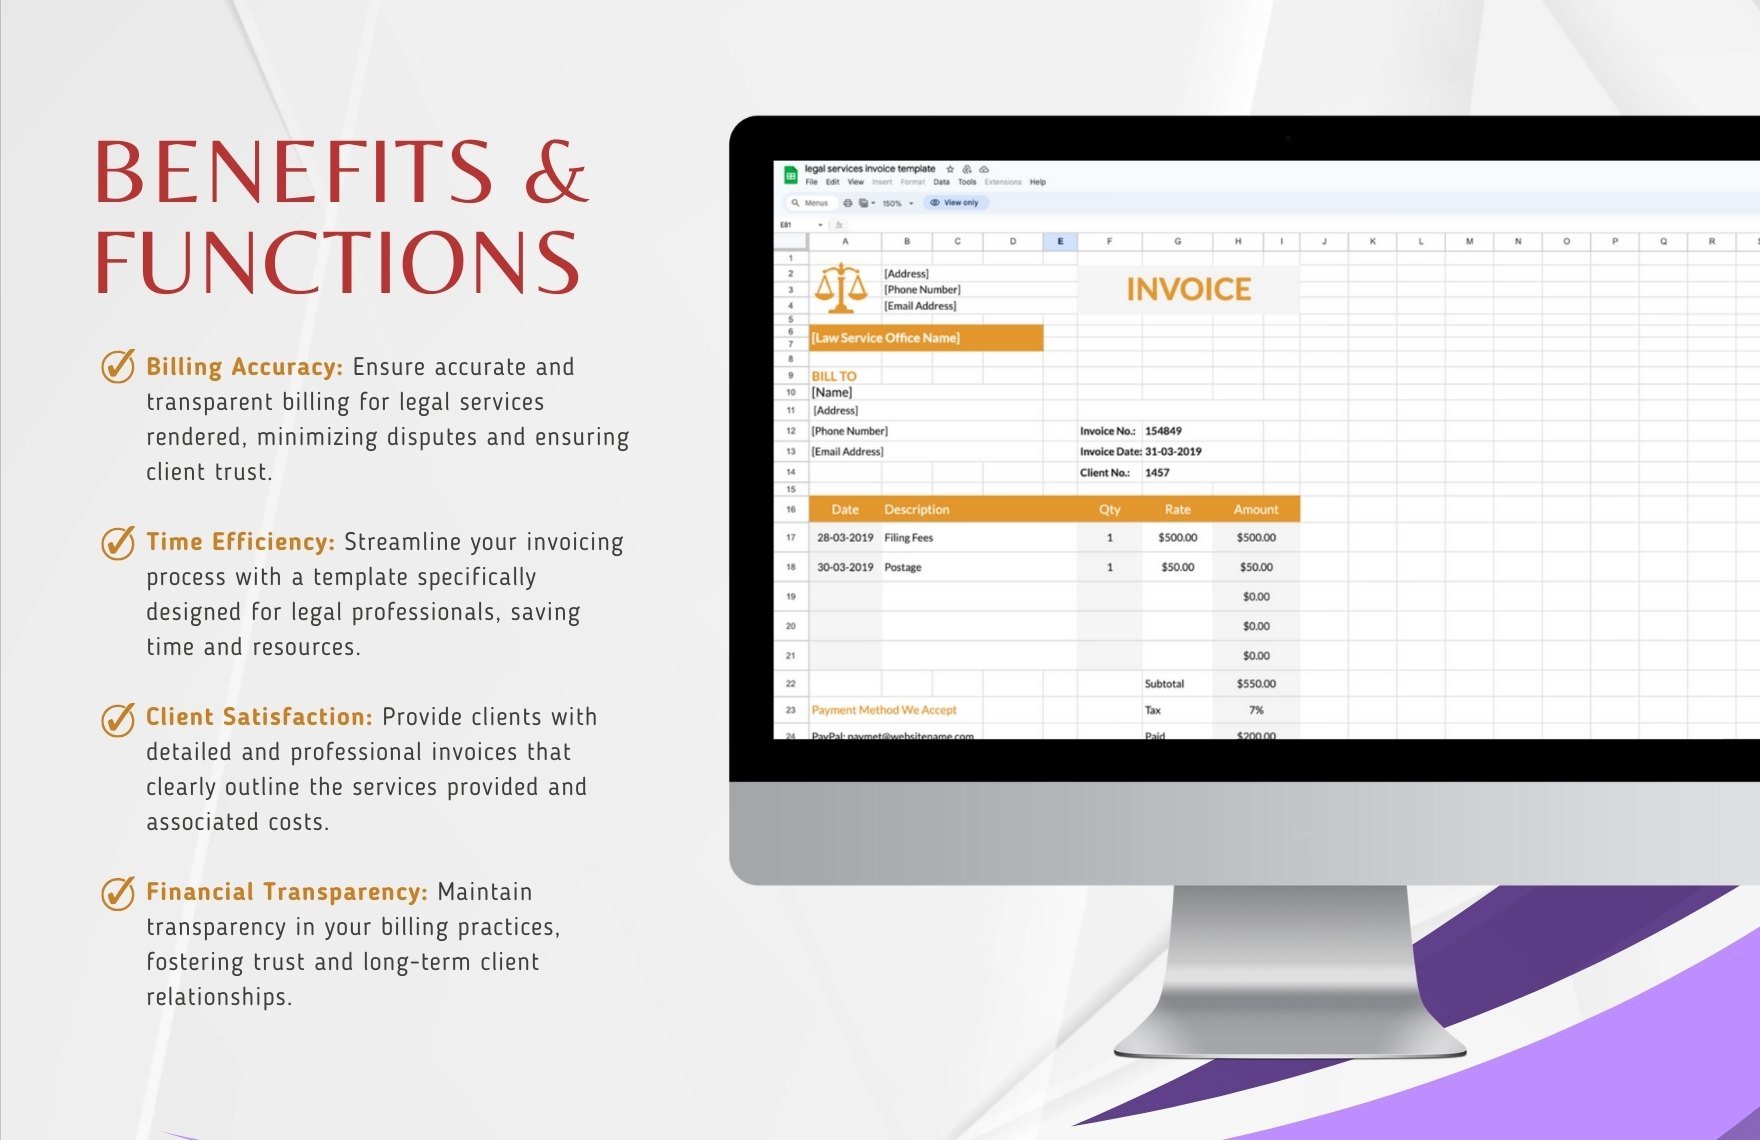 Legal Services Invoice Template